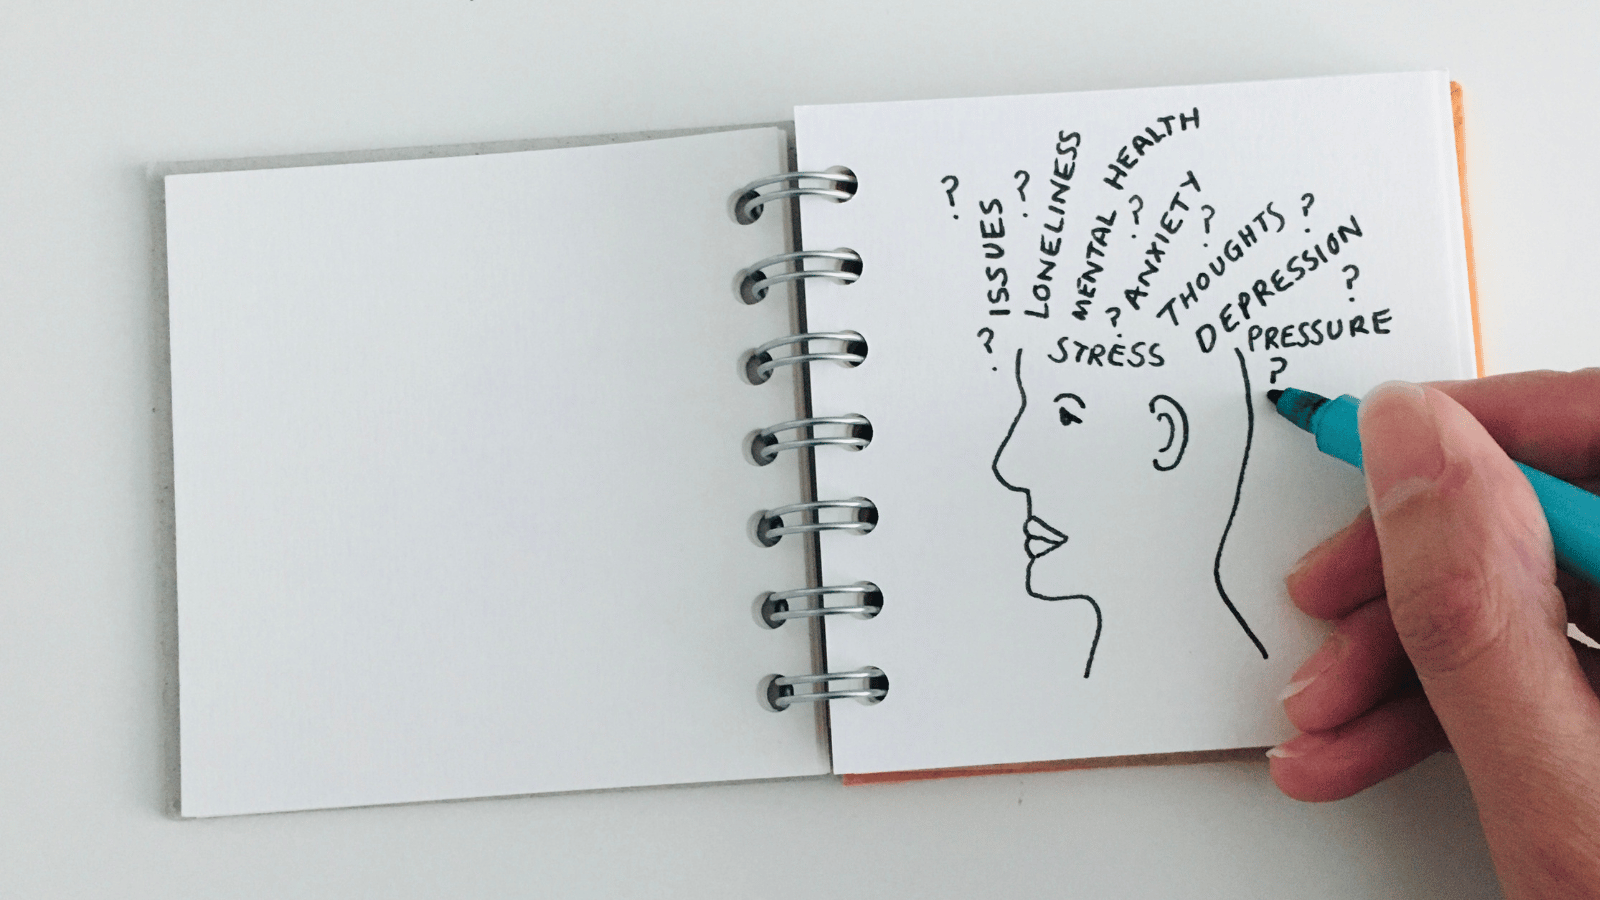 Words coming out top of sketched head with question marks. Words are: 'Loneliness', 'Issues', 'Stress', 'Mental Health', 'Anxiety', 'Thoughts', 'Depression', 'Pressure'